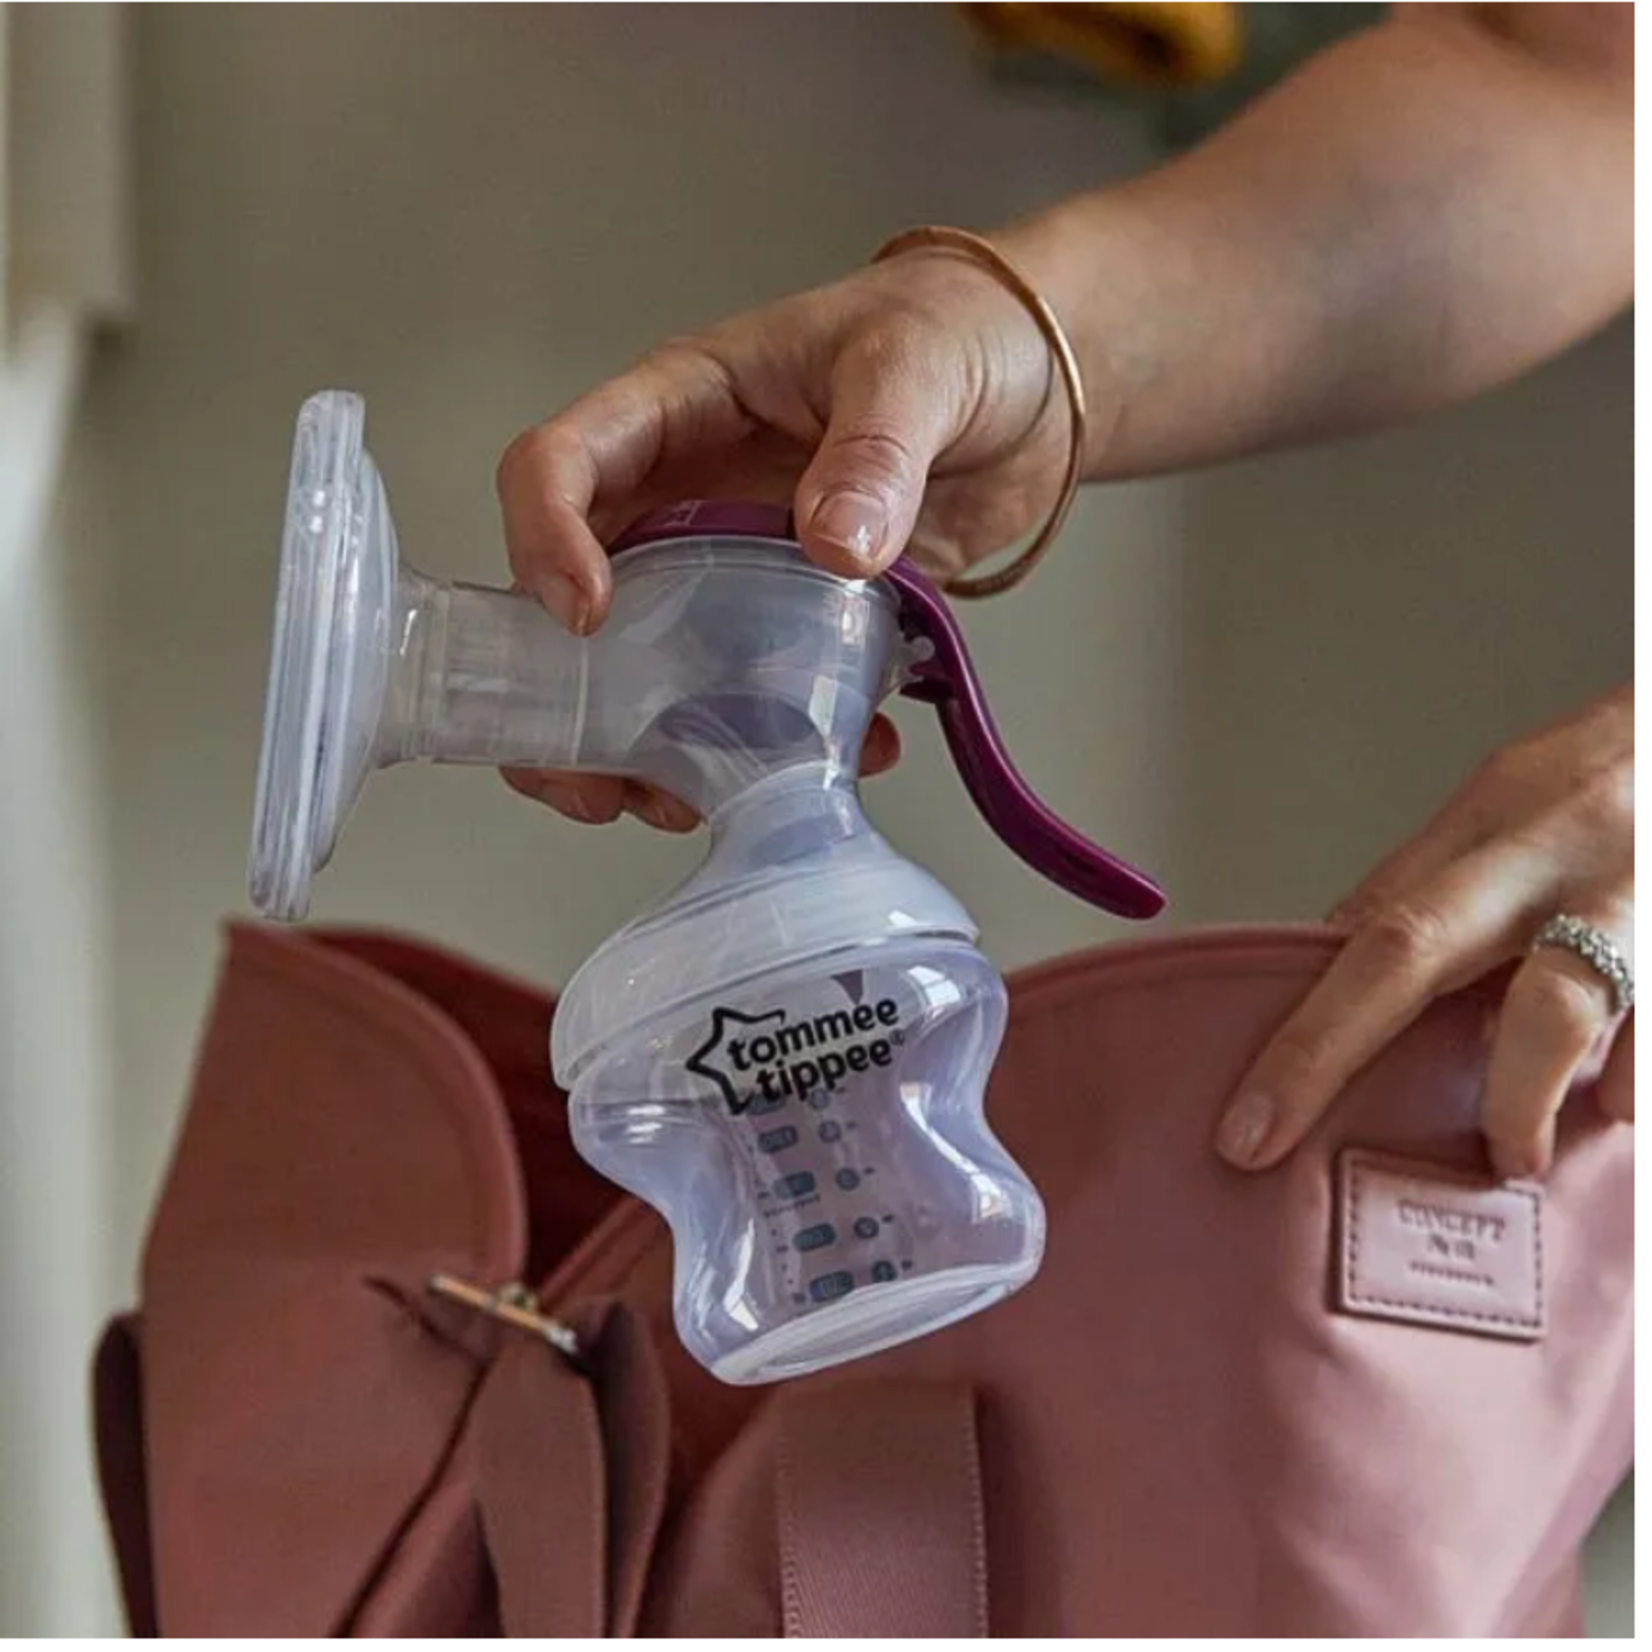 Tommee Tippee Made for Me Breastfeeding Kit